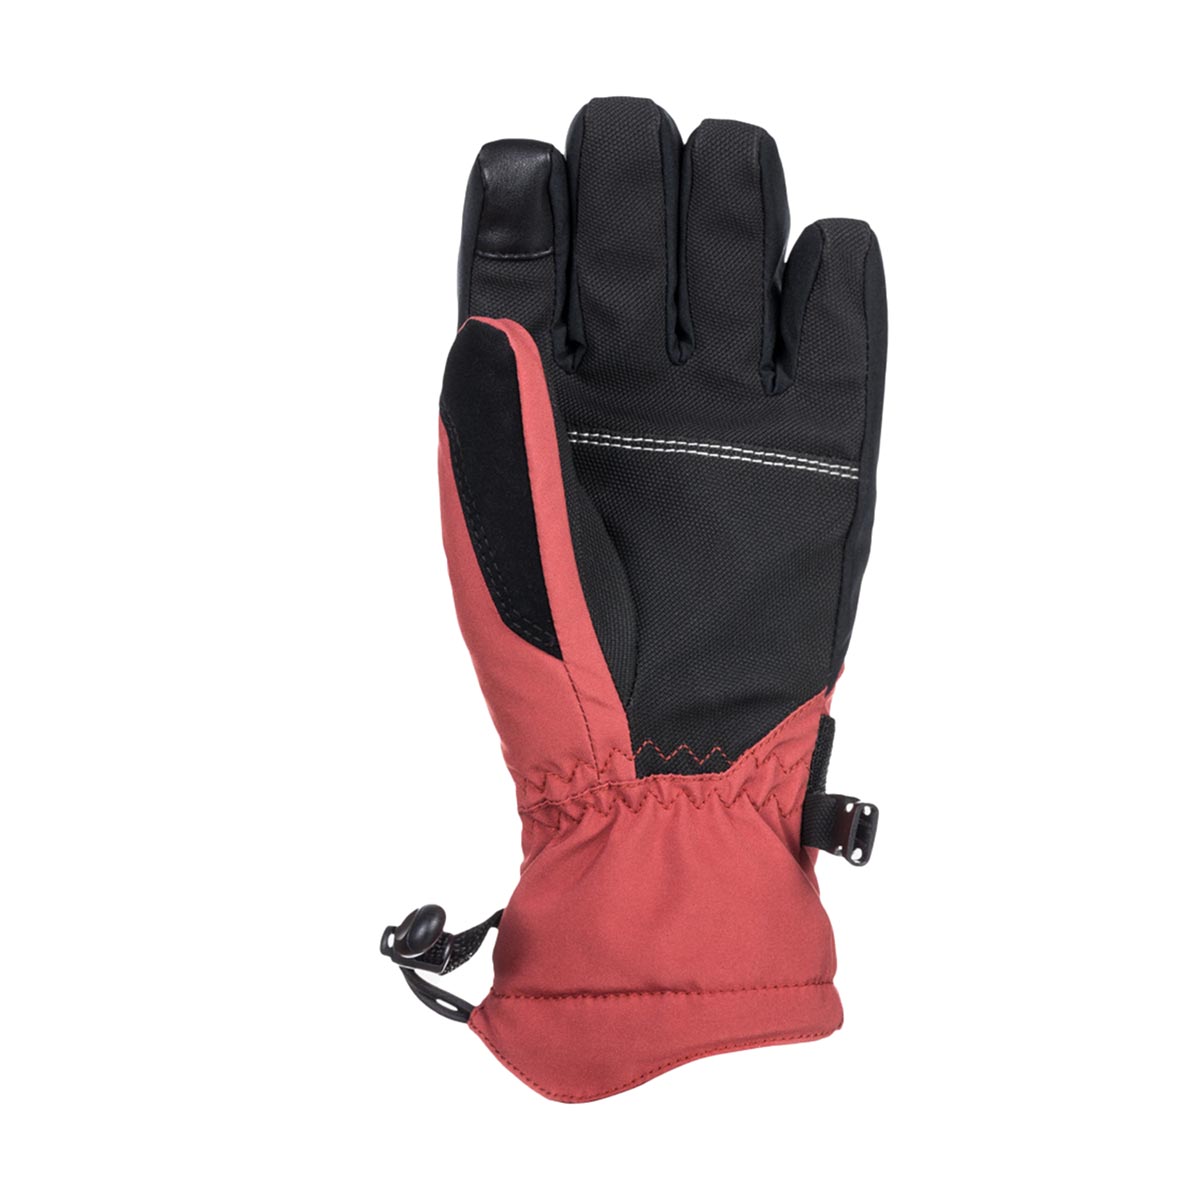 QUIKSILVER - MISSION YOUTH GLOVE